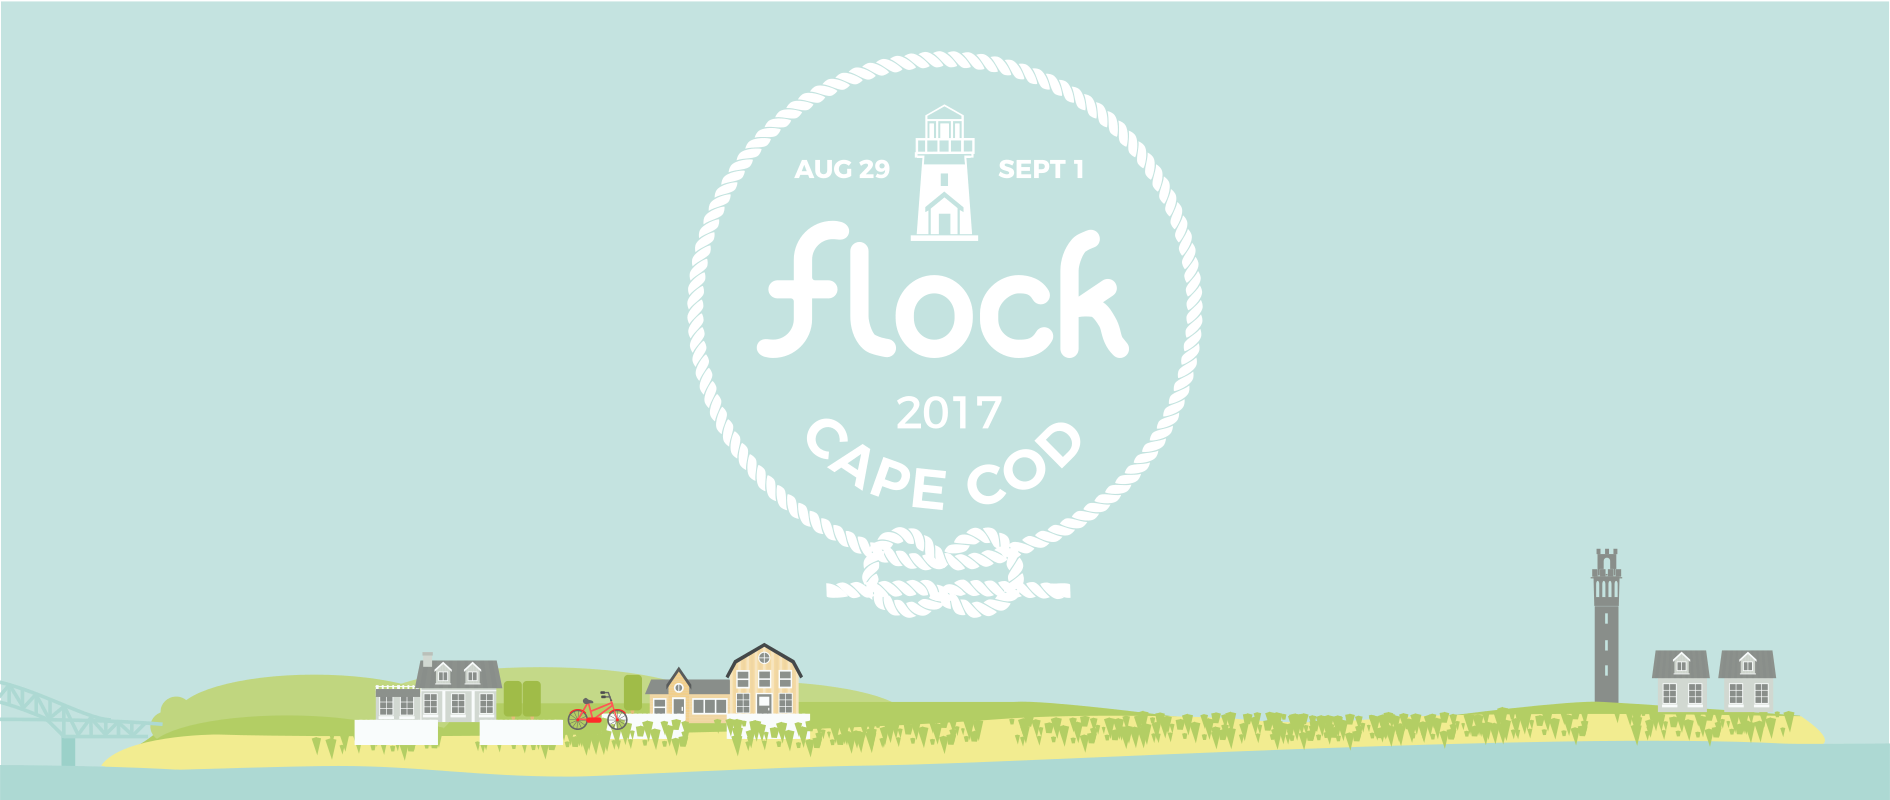 Propose a talk for Flock!